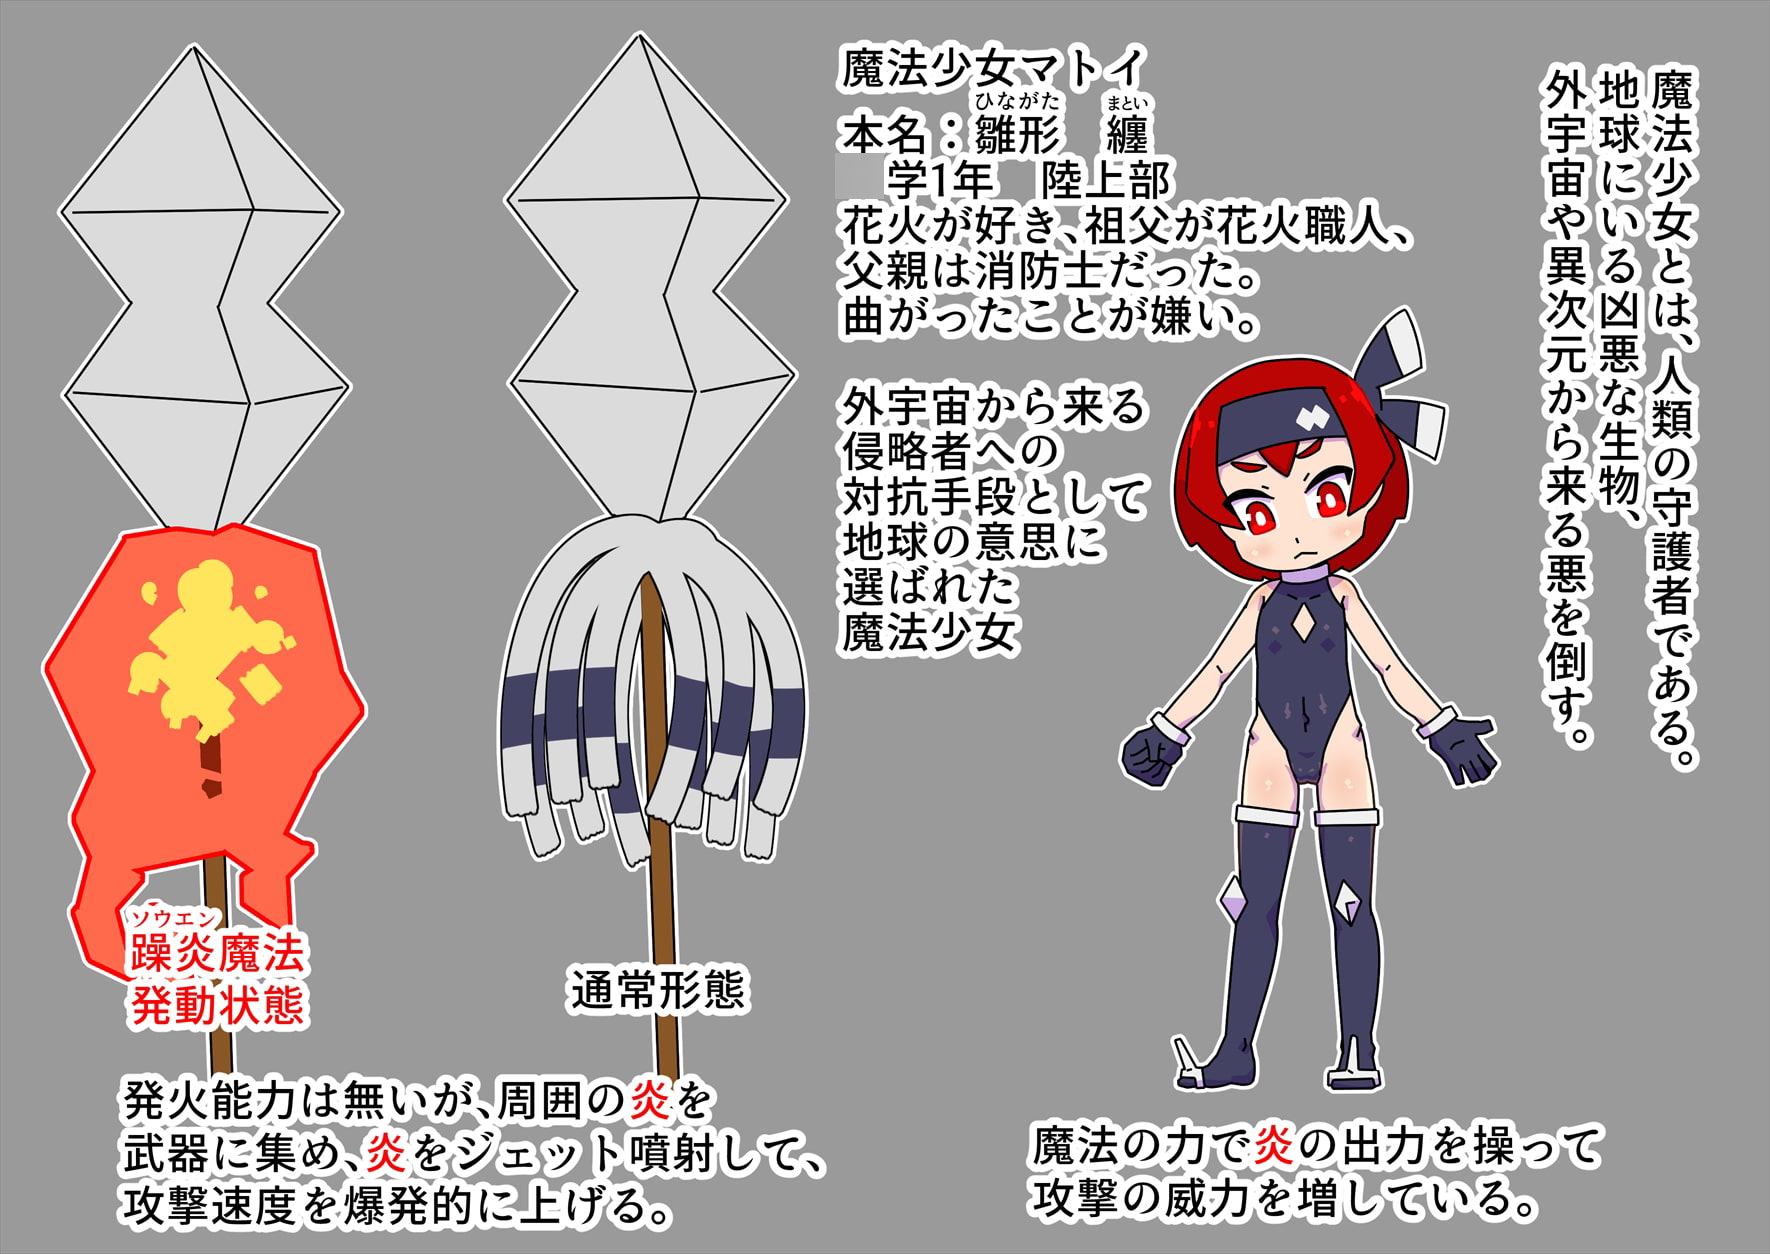 Magical Girl Matoi is Penis-modified, and Forced to Squirt Out Her Very Being